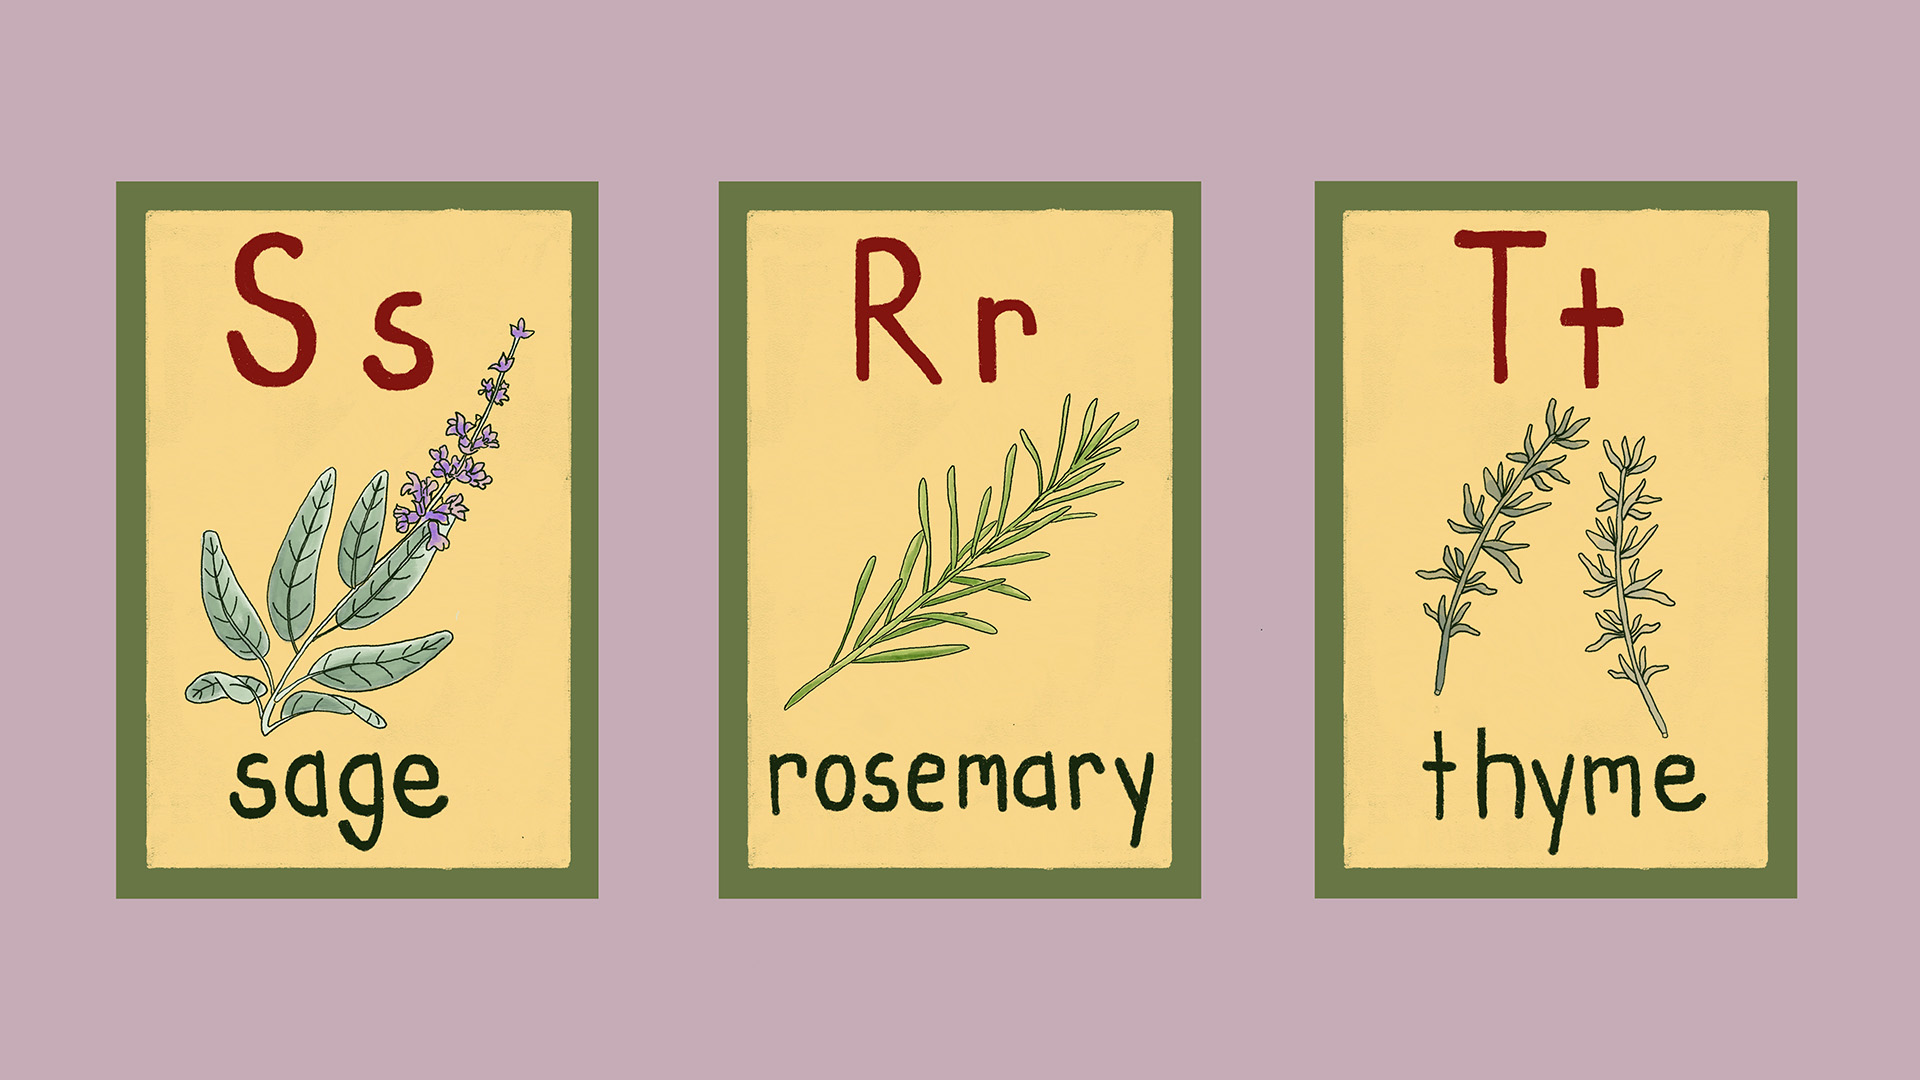 An illustration of 3 school flashcards showing sage, rosemary and thyme